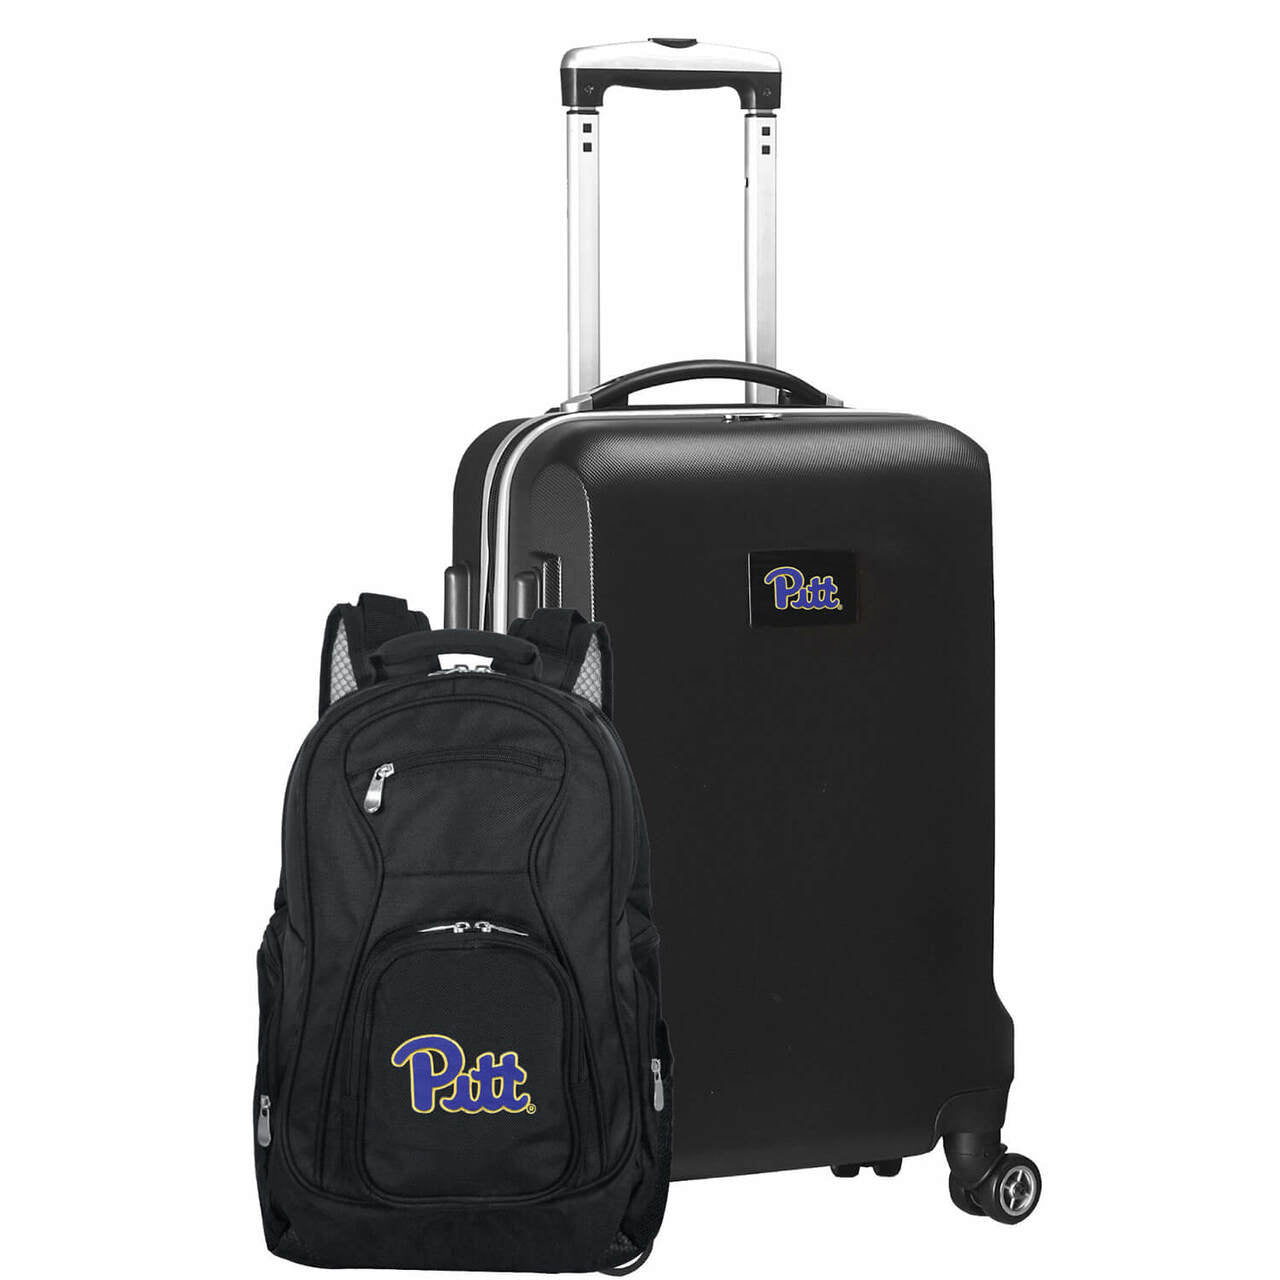 Pittsburgh Panthers Deluxe 2-Piece Backpack and Carry on Set in Black